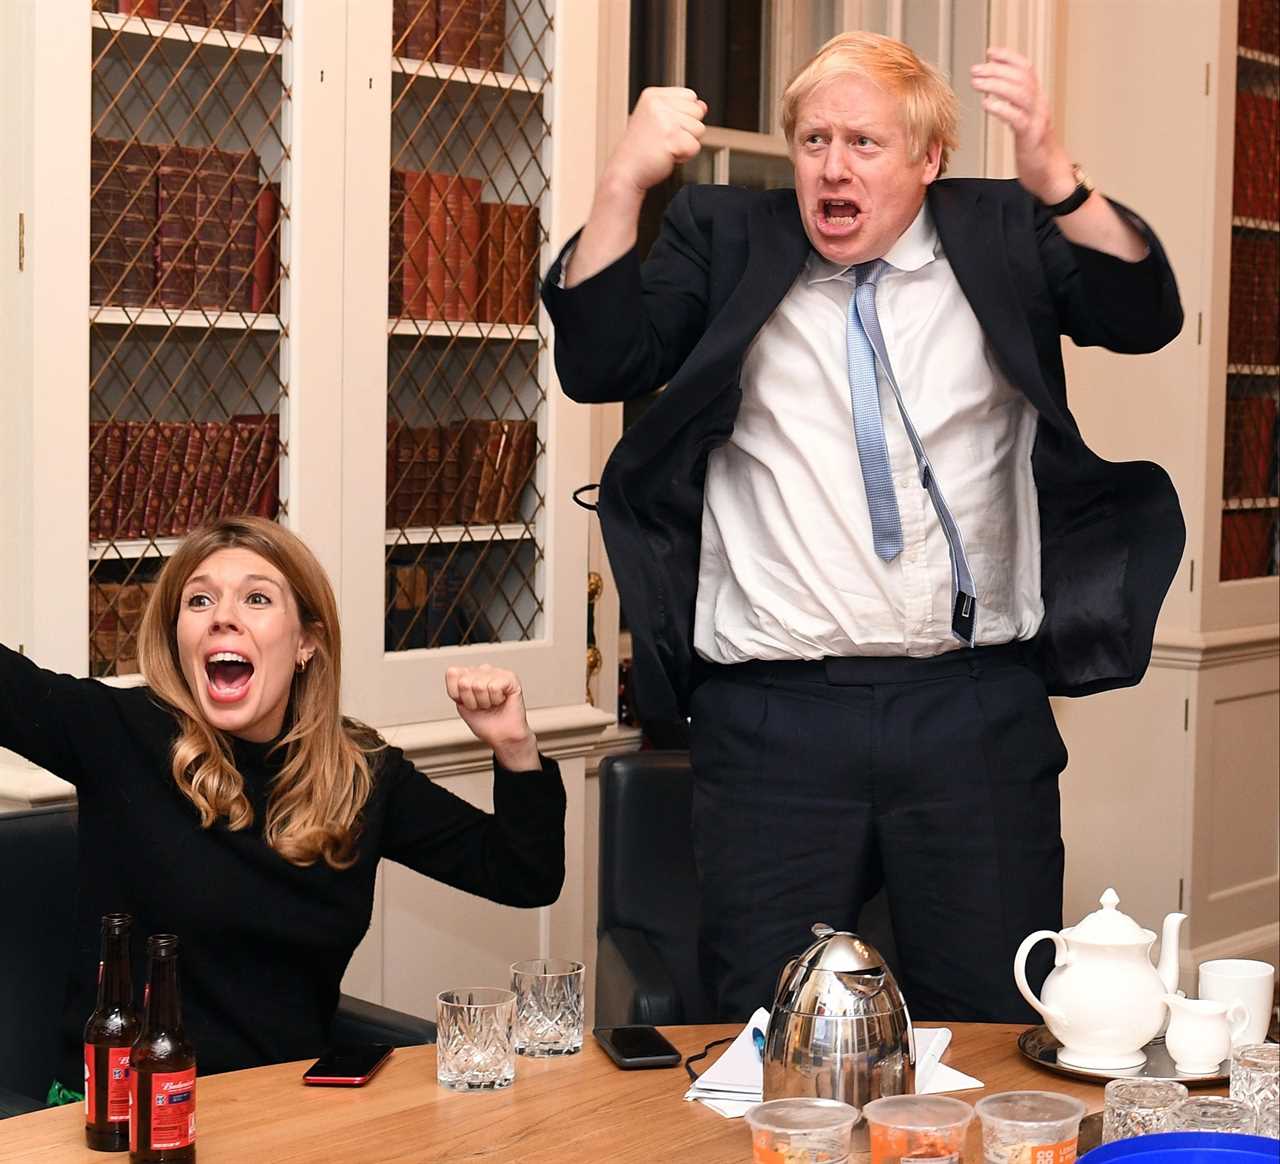 How greased piglet Boris Johnson lost grip on power after stunning election win saw him seize power with huge majority